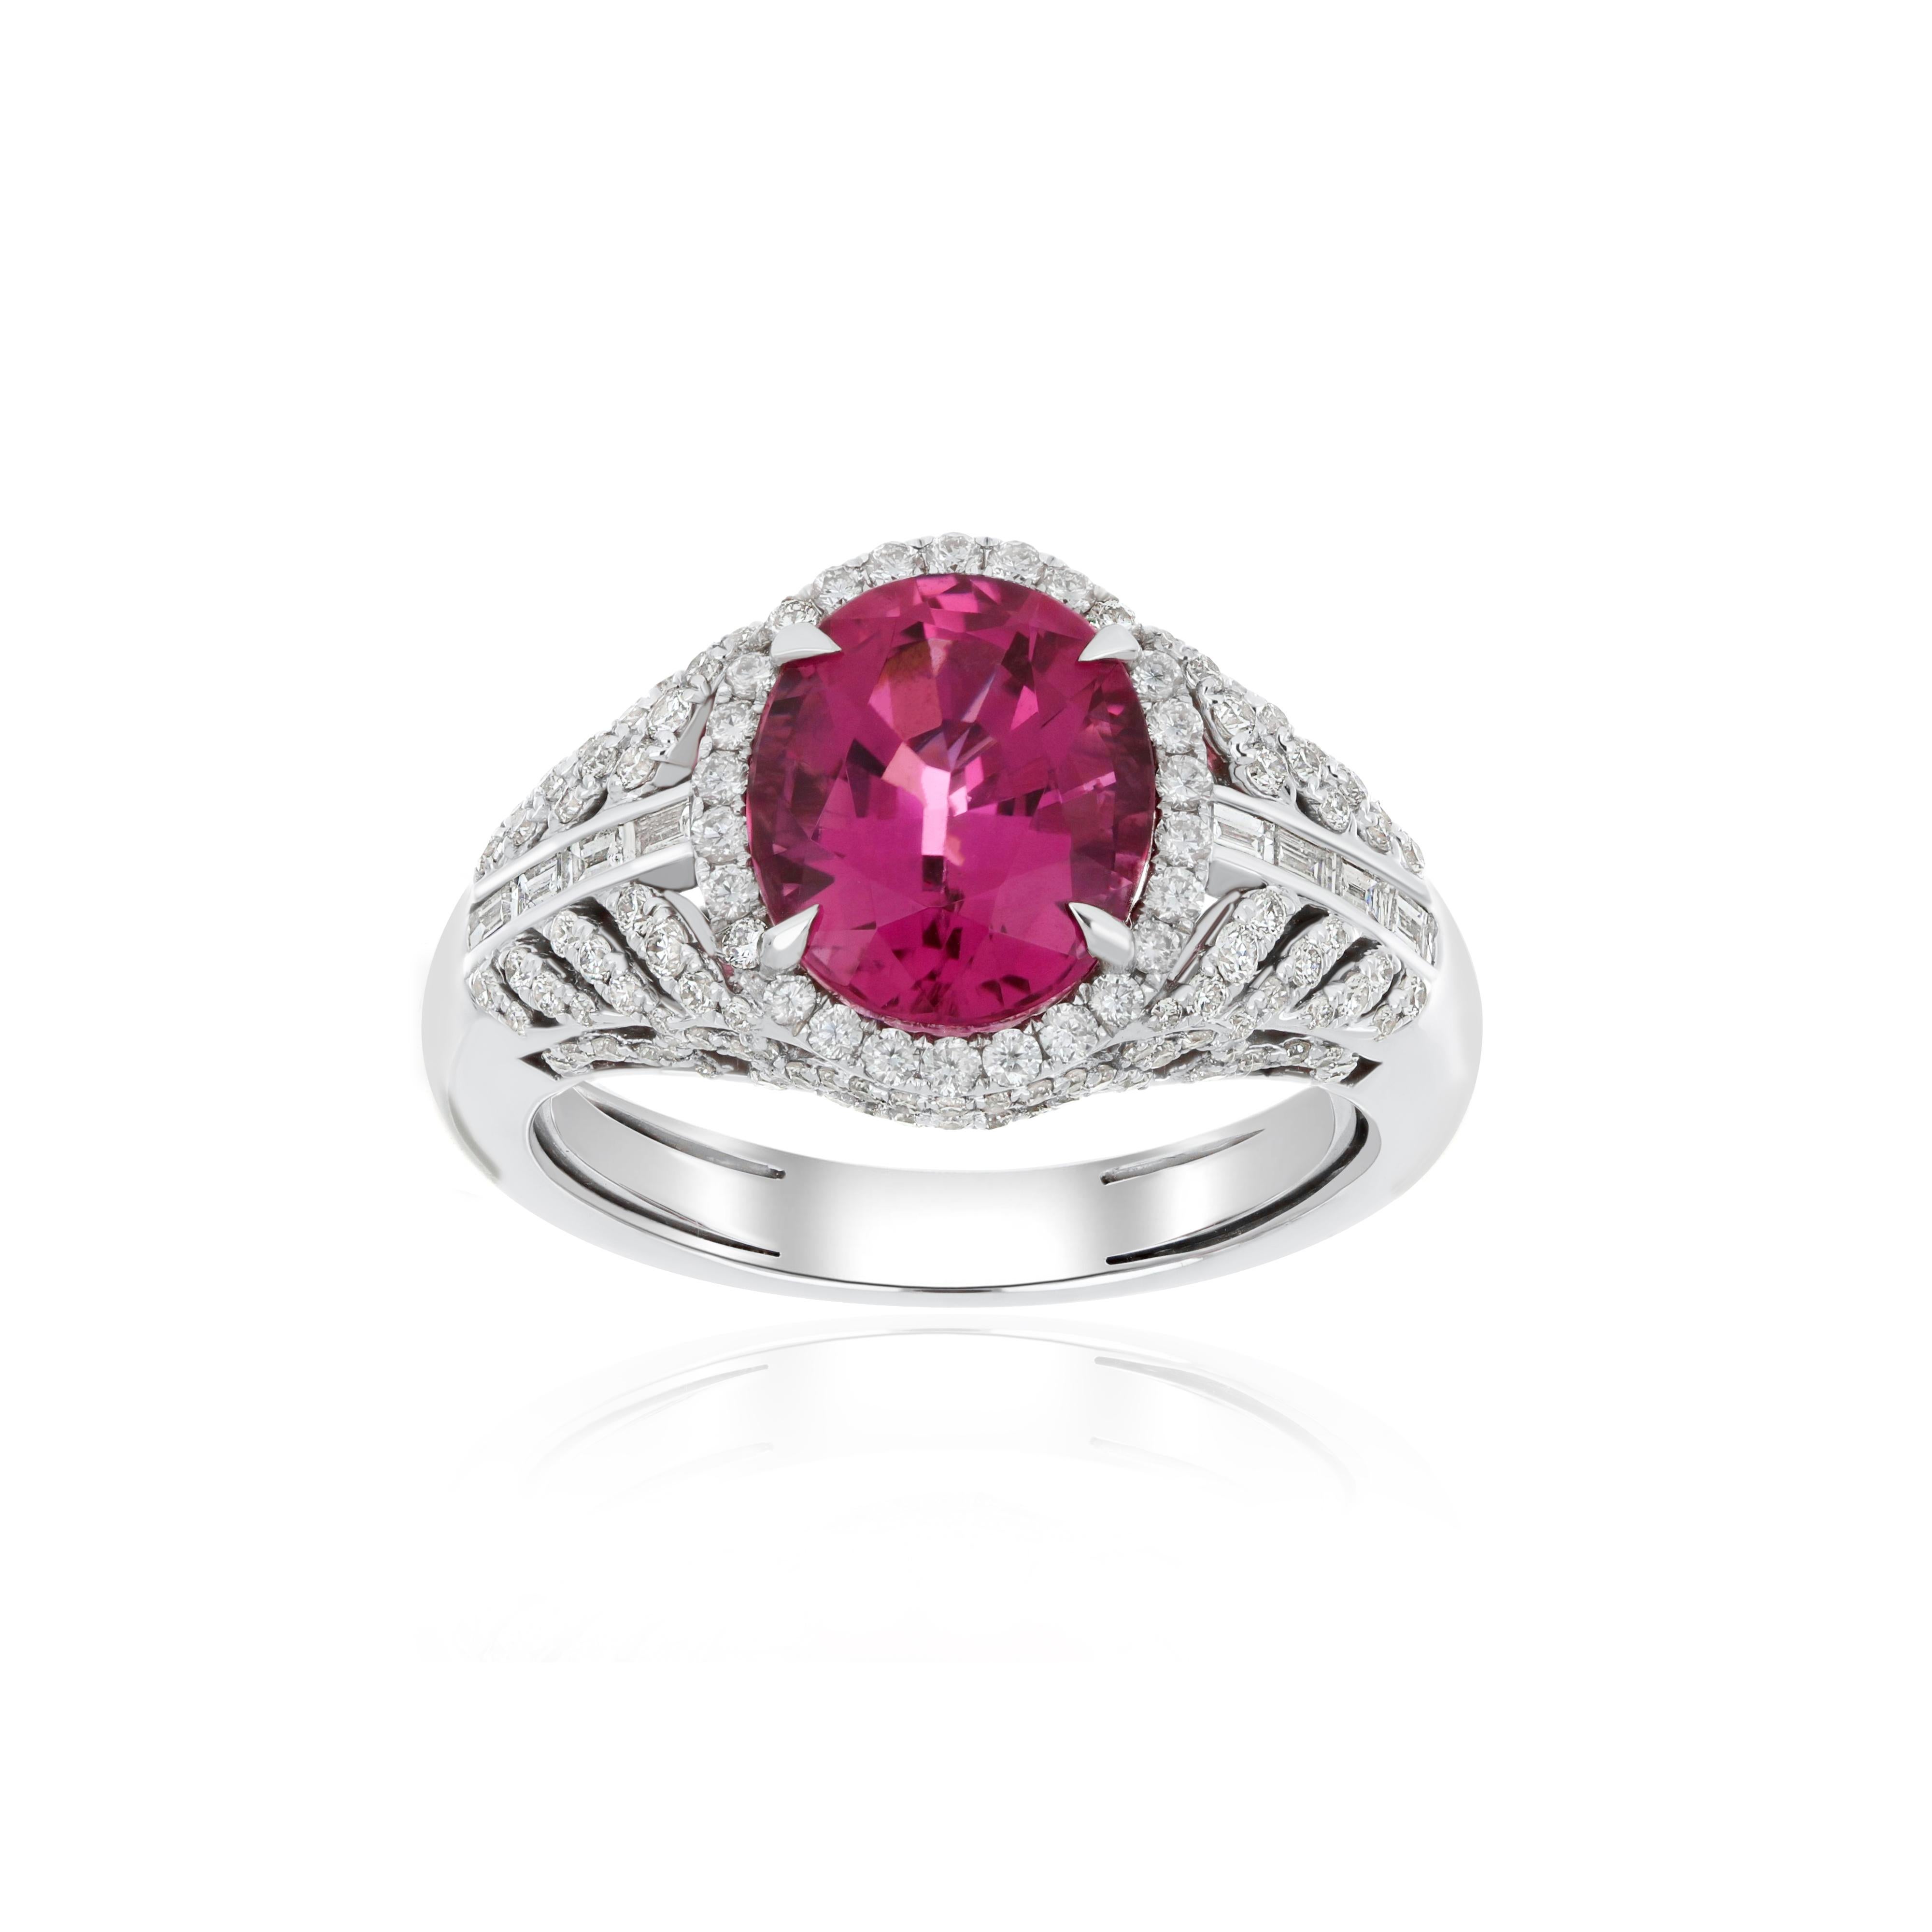 Elegant and exquisitely detailed 18K White Gold Ring, with 3.85 Cts Oval Shape Rubellite set in center and Surrounded by Micro pave Diamonds, weighing approx. 0.95 CT's. total carat weight to further enhance the beauty of the ring. Beautifully Hand